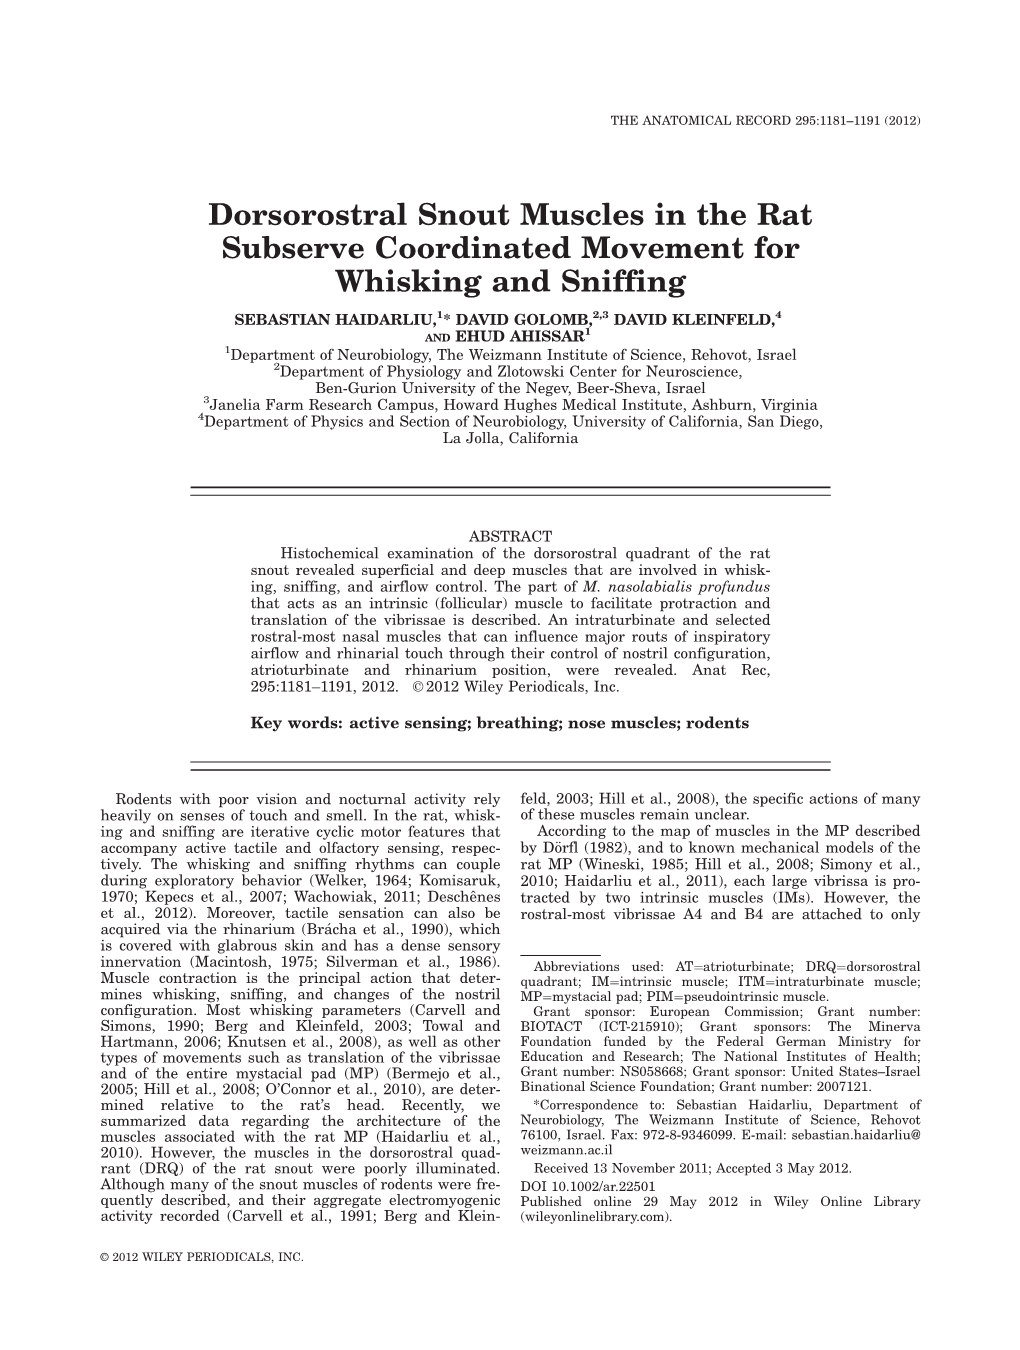 Dorsorostral Snout Muscles in the Rat Subserve Coordinated Movement for Whisking and Sniffing